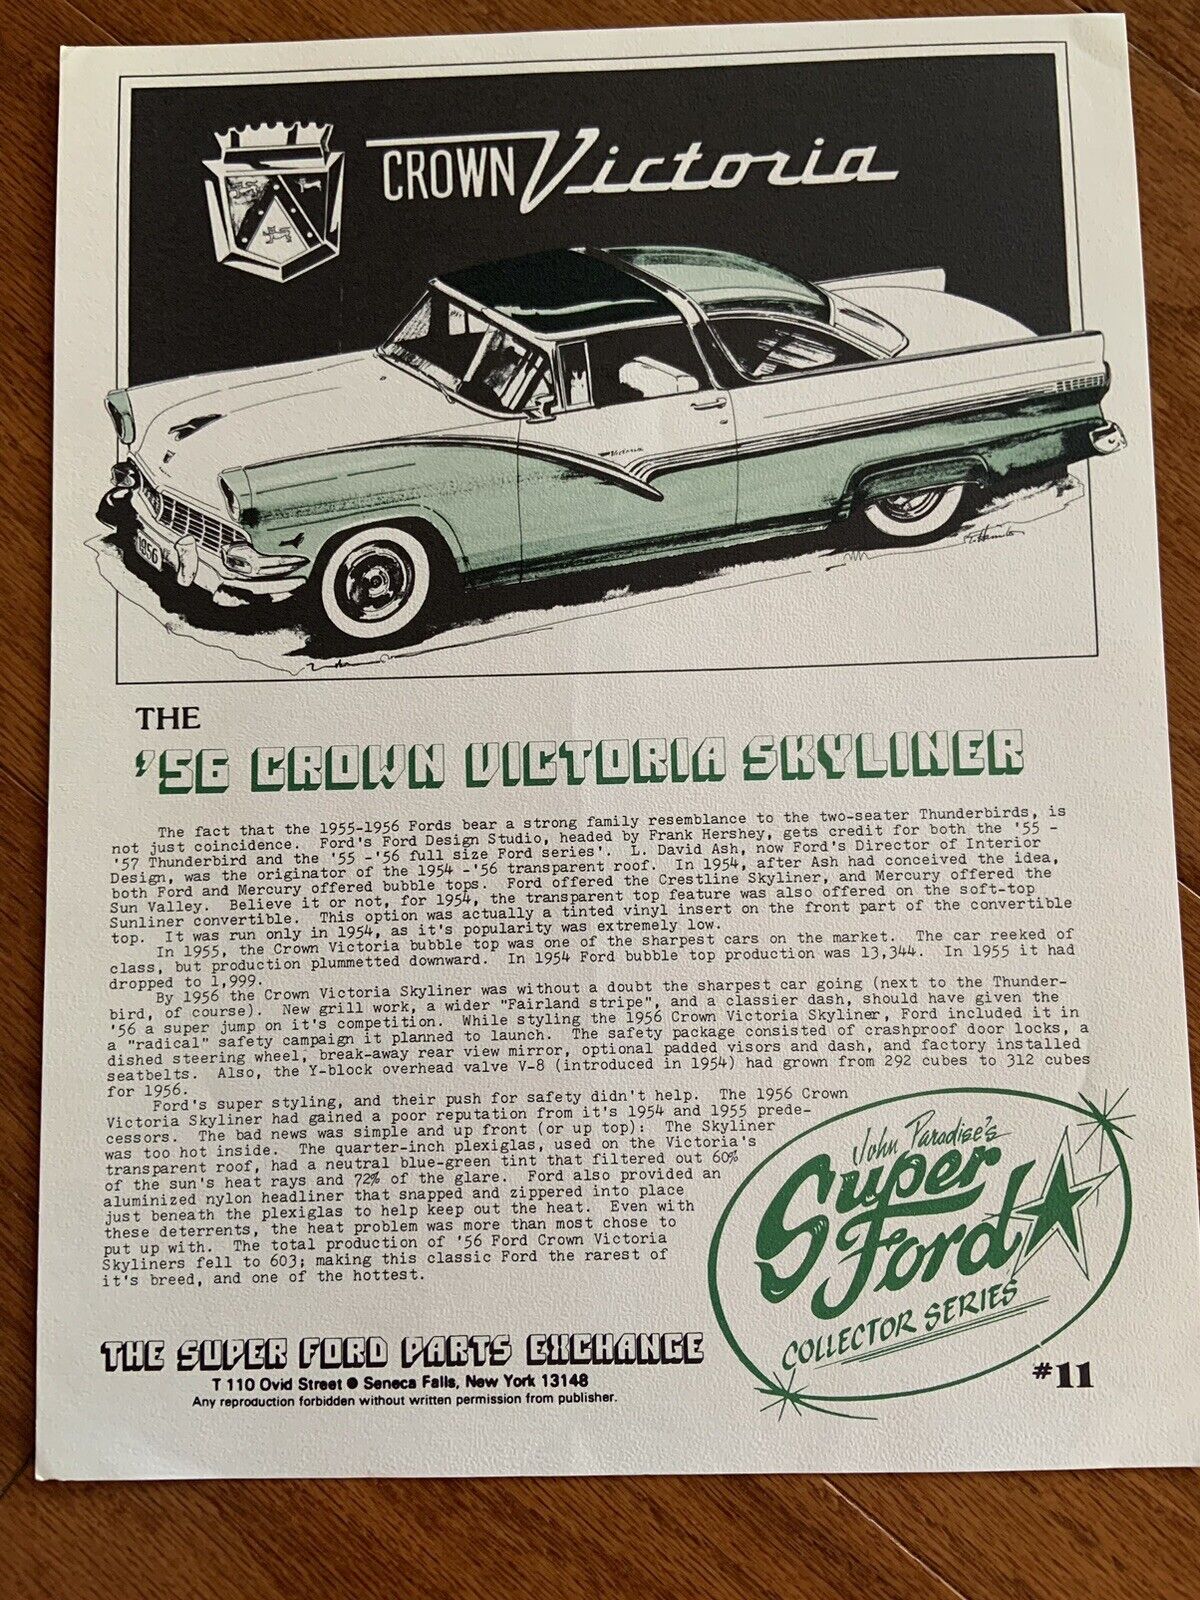 JOHN PARADISE\'S SUPER FORD COLLECTOR SERIES 56 CROWN VICTORIA #11PRINT AD